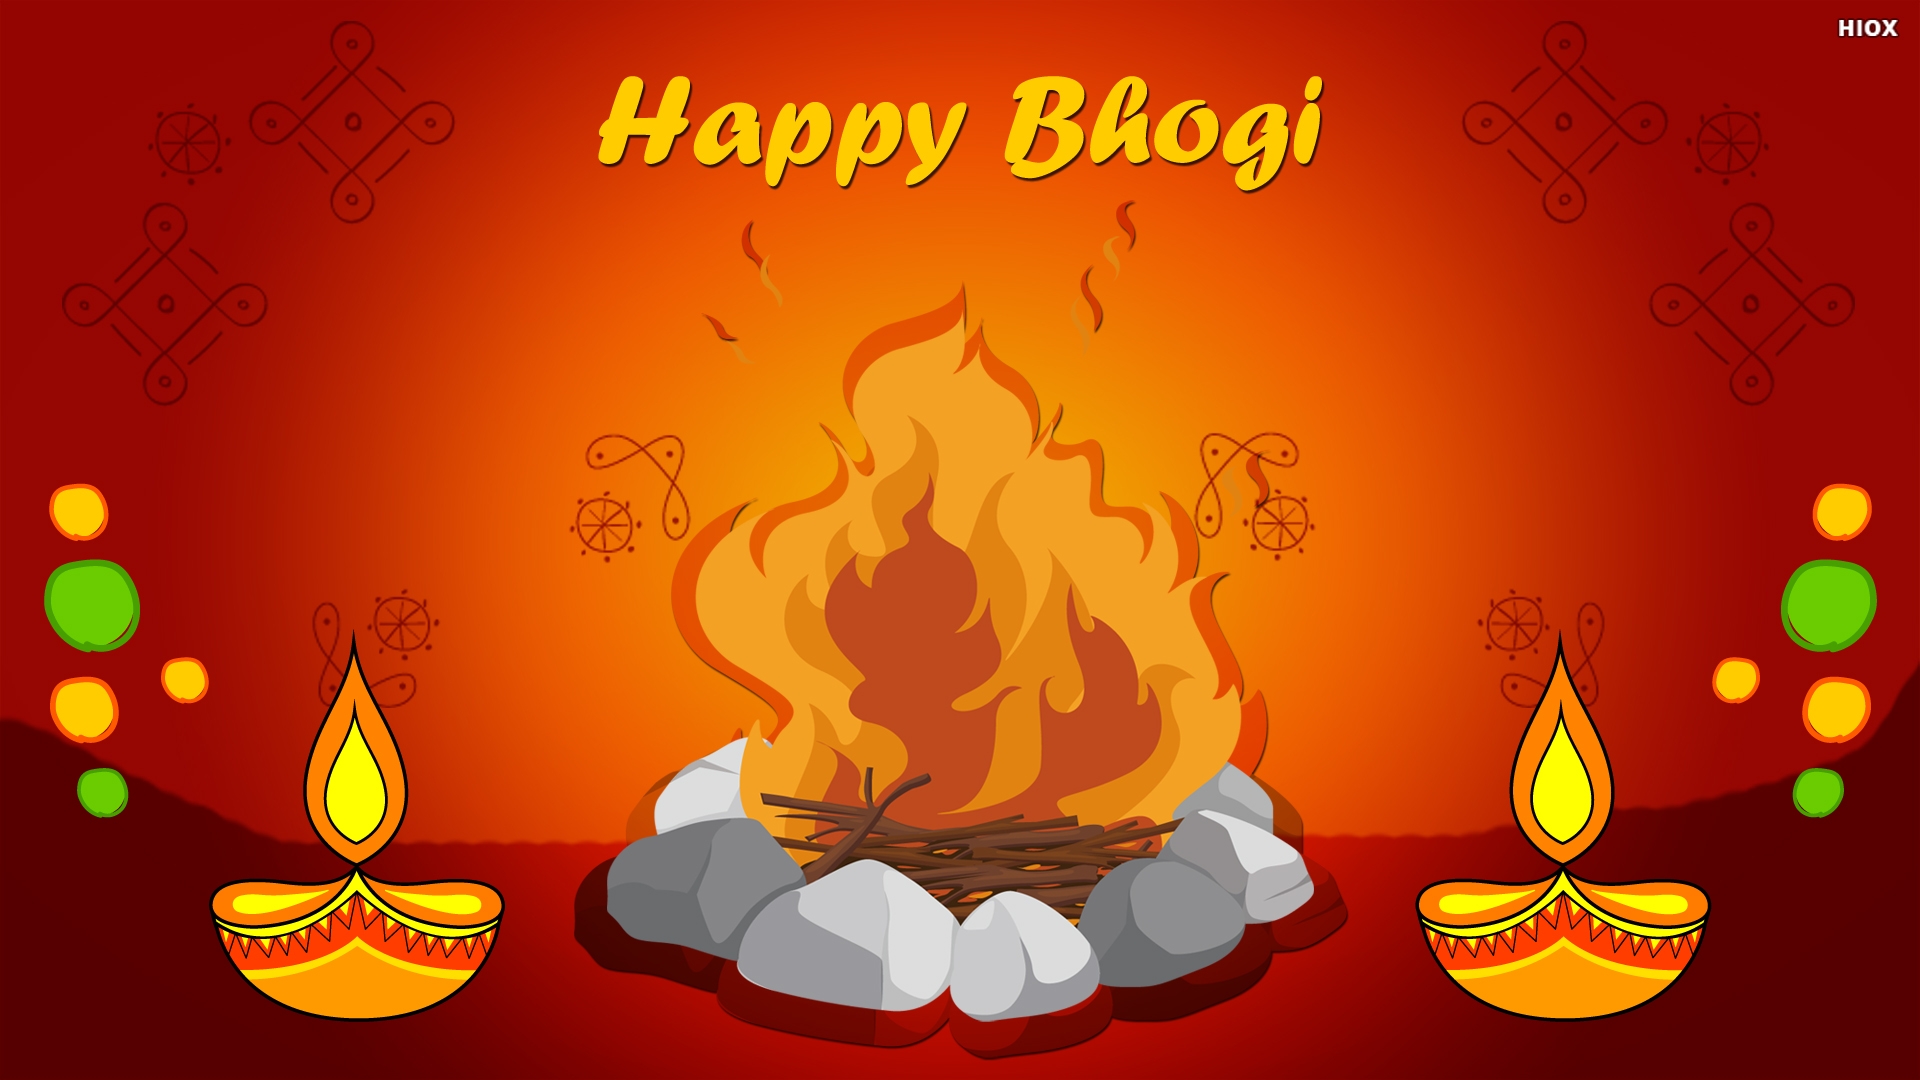 Happy Bhogi 2021 Ultra-HD Wallpapers For WhatsApp Status, Instagram Story A...